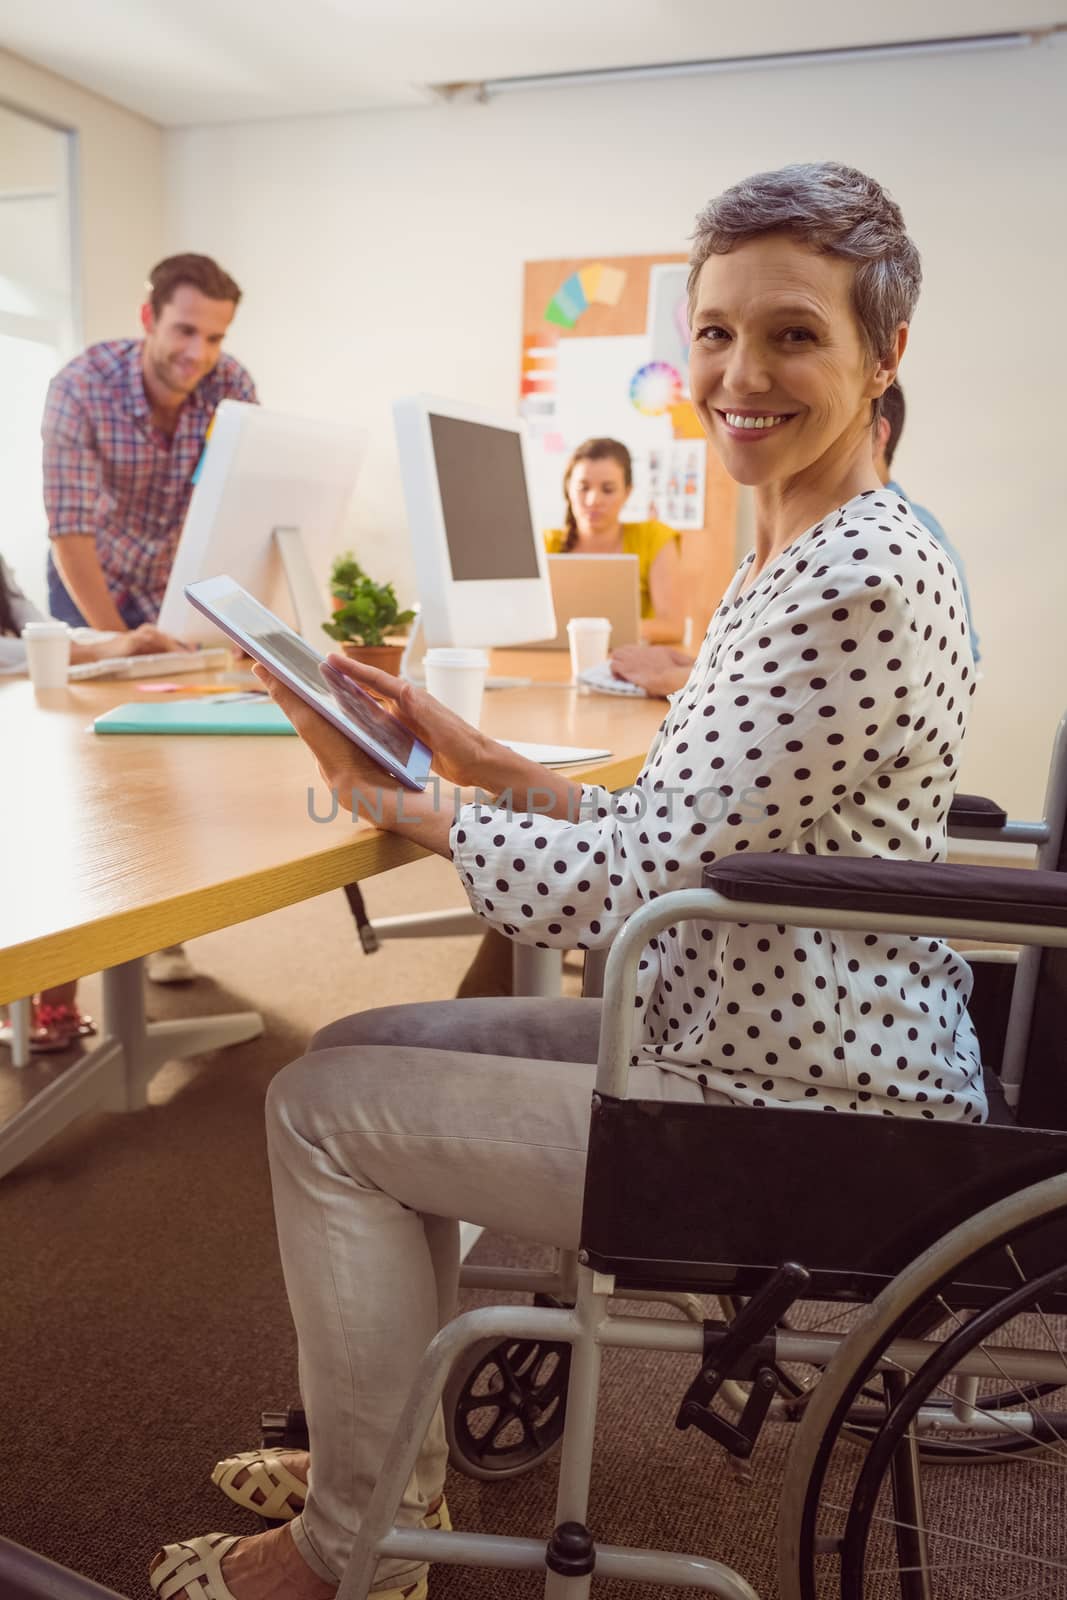 Creative businesswoman in wheelchair using a tablet by Wavebreakmedia